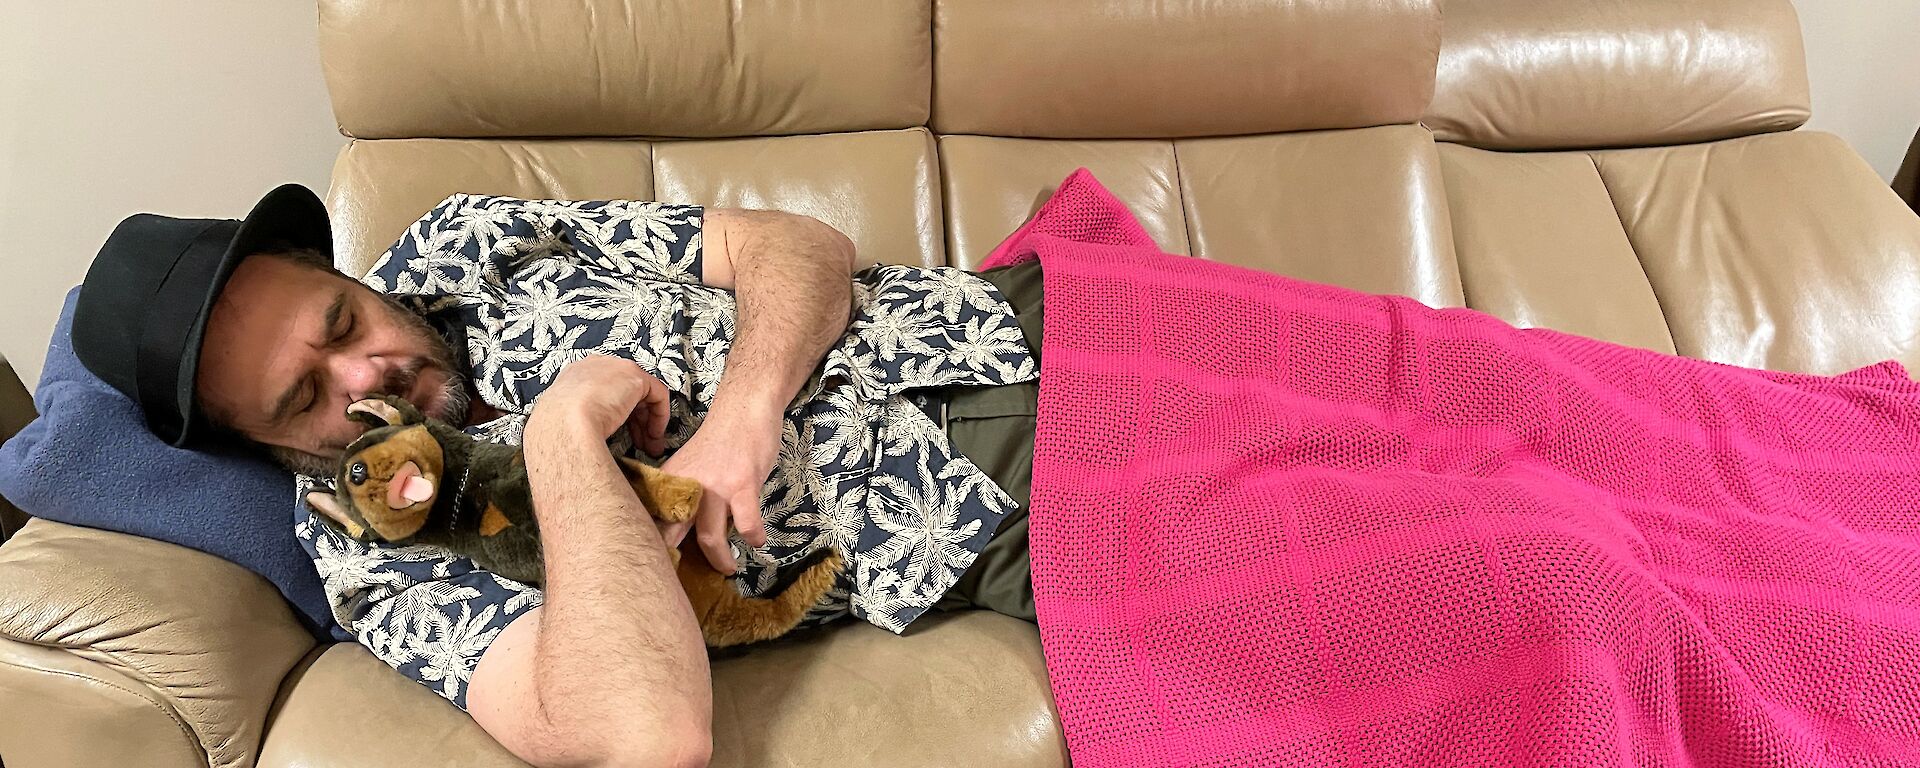 A man covered in a hot pink blanket lies on a couch cuddling a stuffed toy dog.